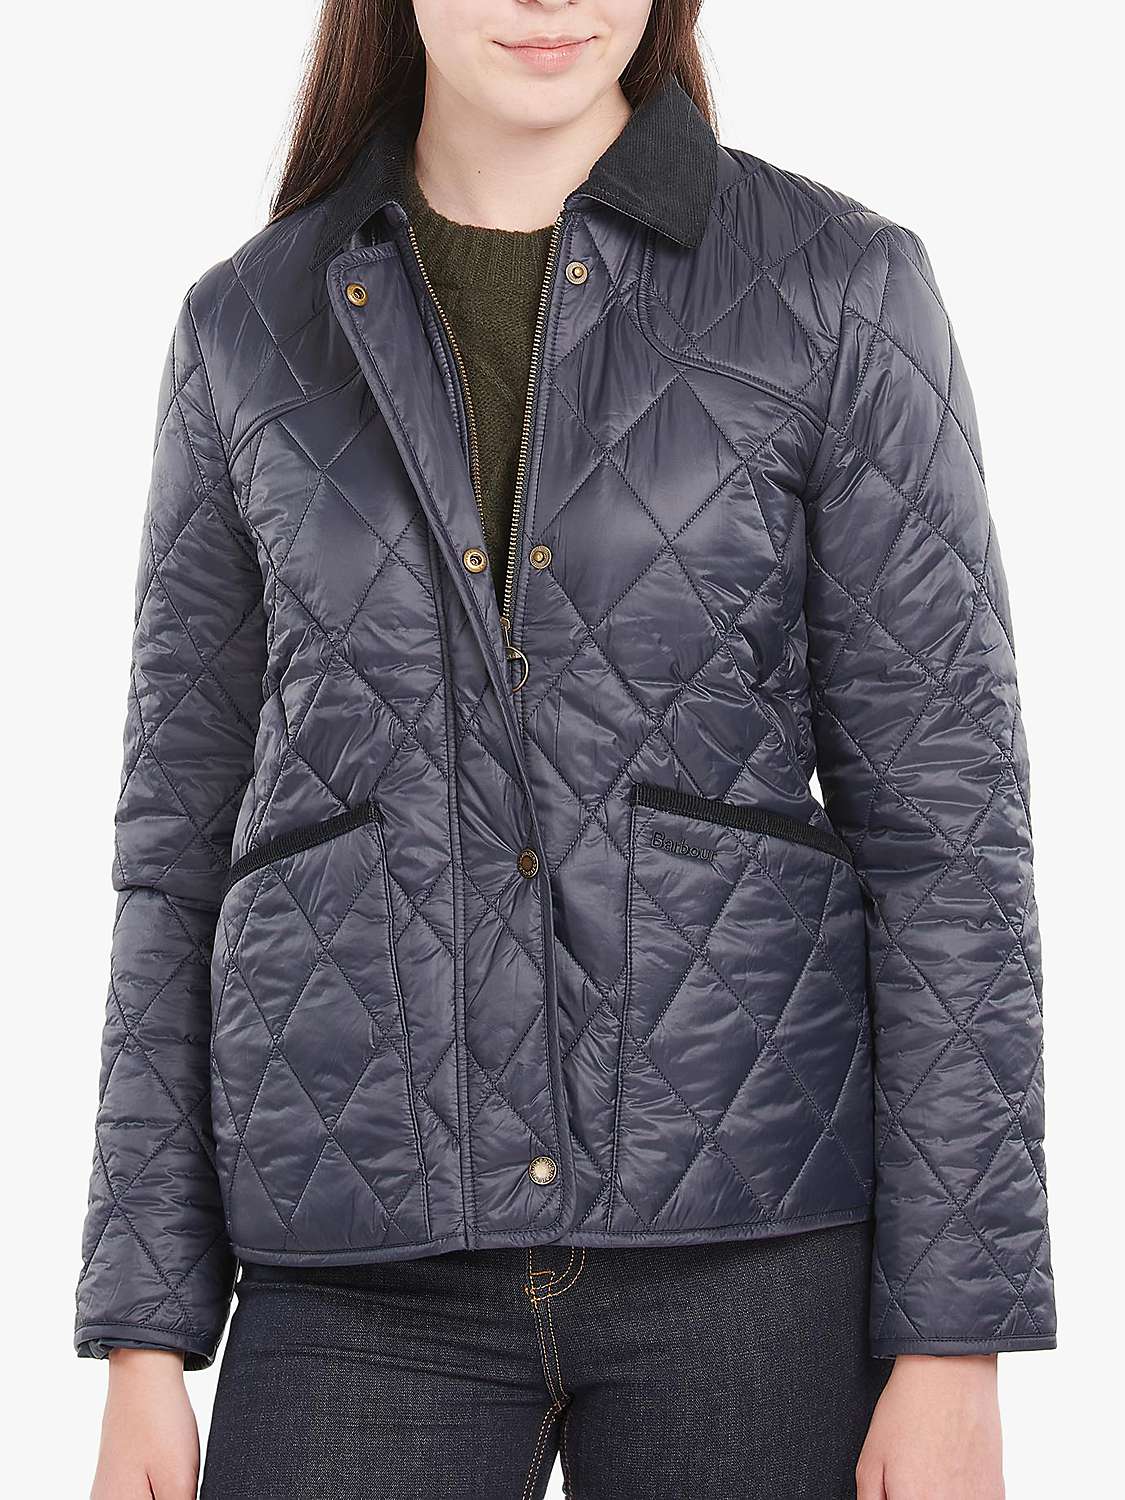 Barbour Ayla Quilted Jacket, Navy at John Lewis & Partners